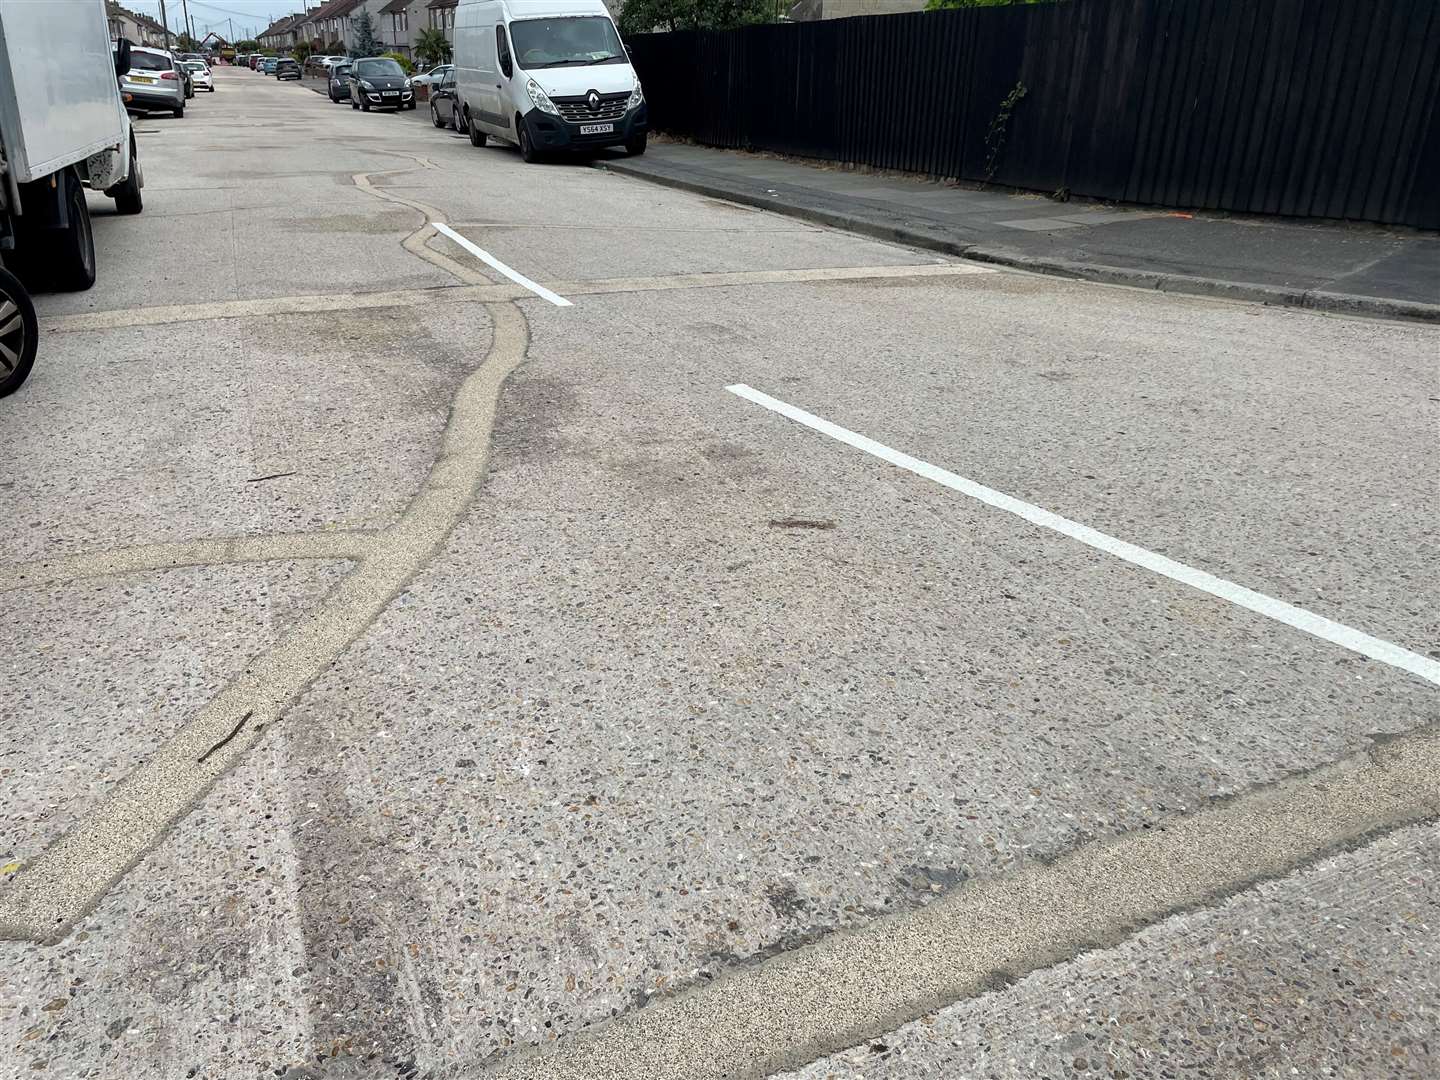 Residents have started a petition to resurface the road “properly”